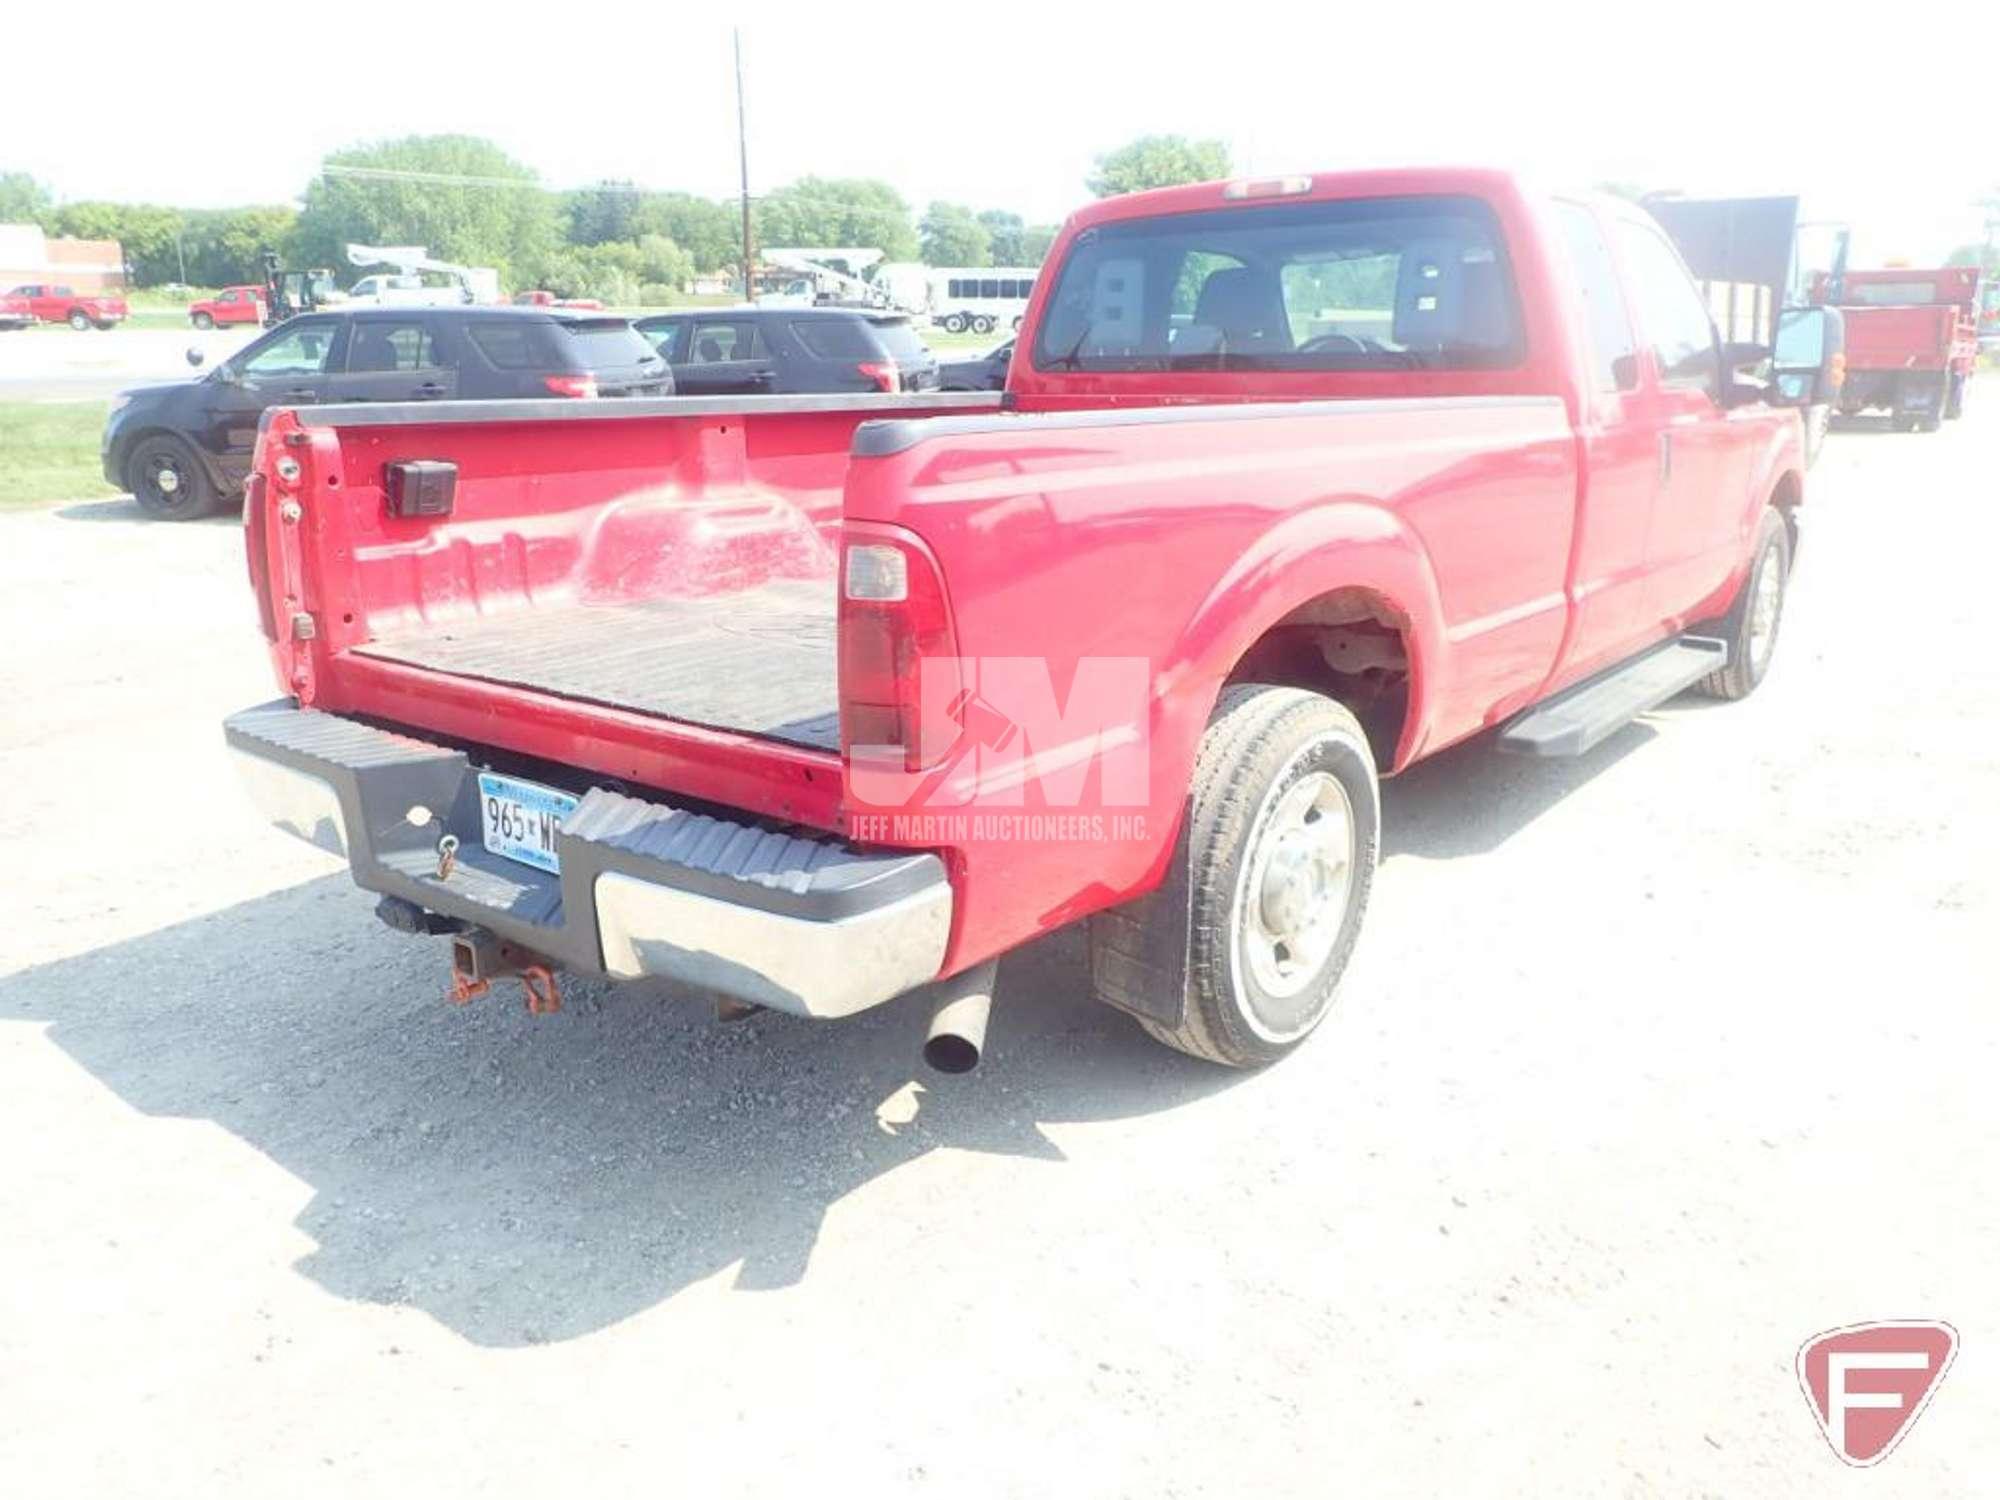 2011 FORD F-250XLT SD EXTENDED CAB 3/4 TON PICKUP VIN: 1FT7X2A60BEA31439